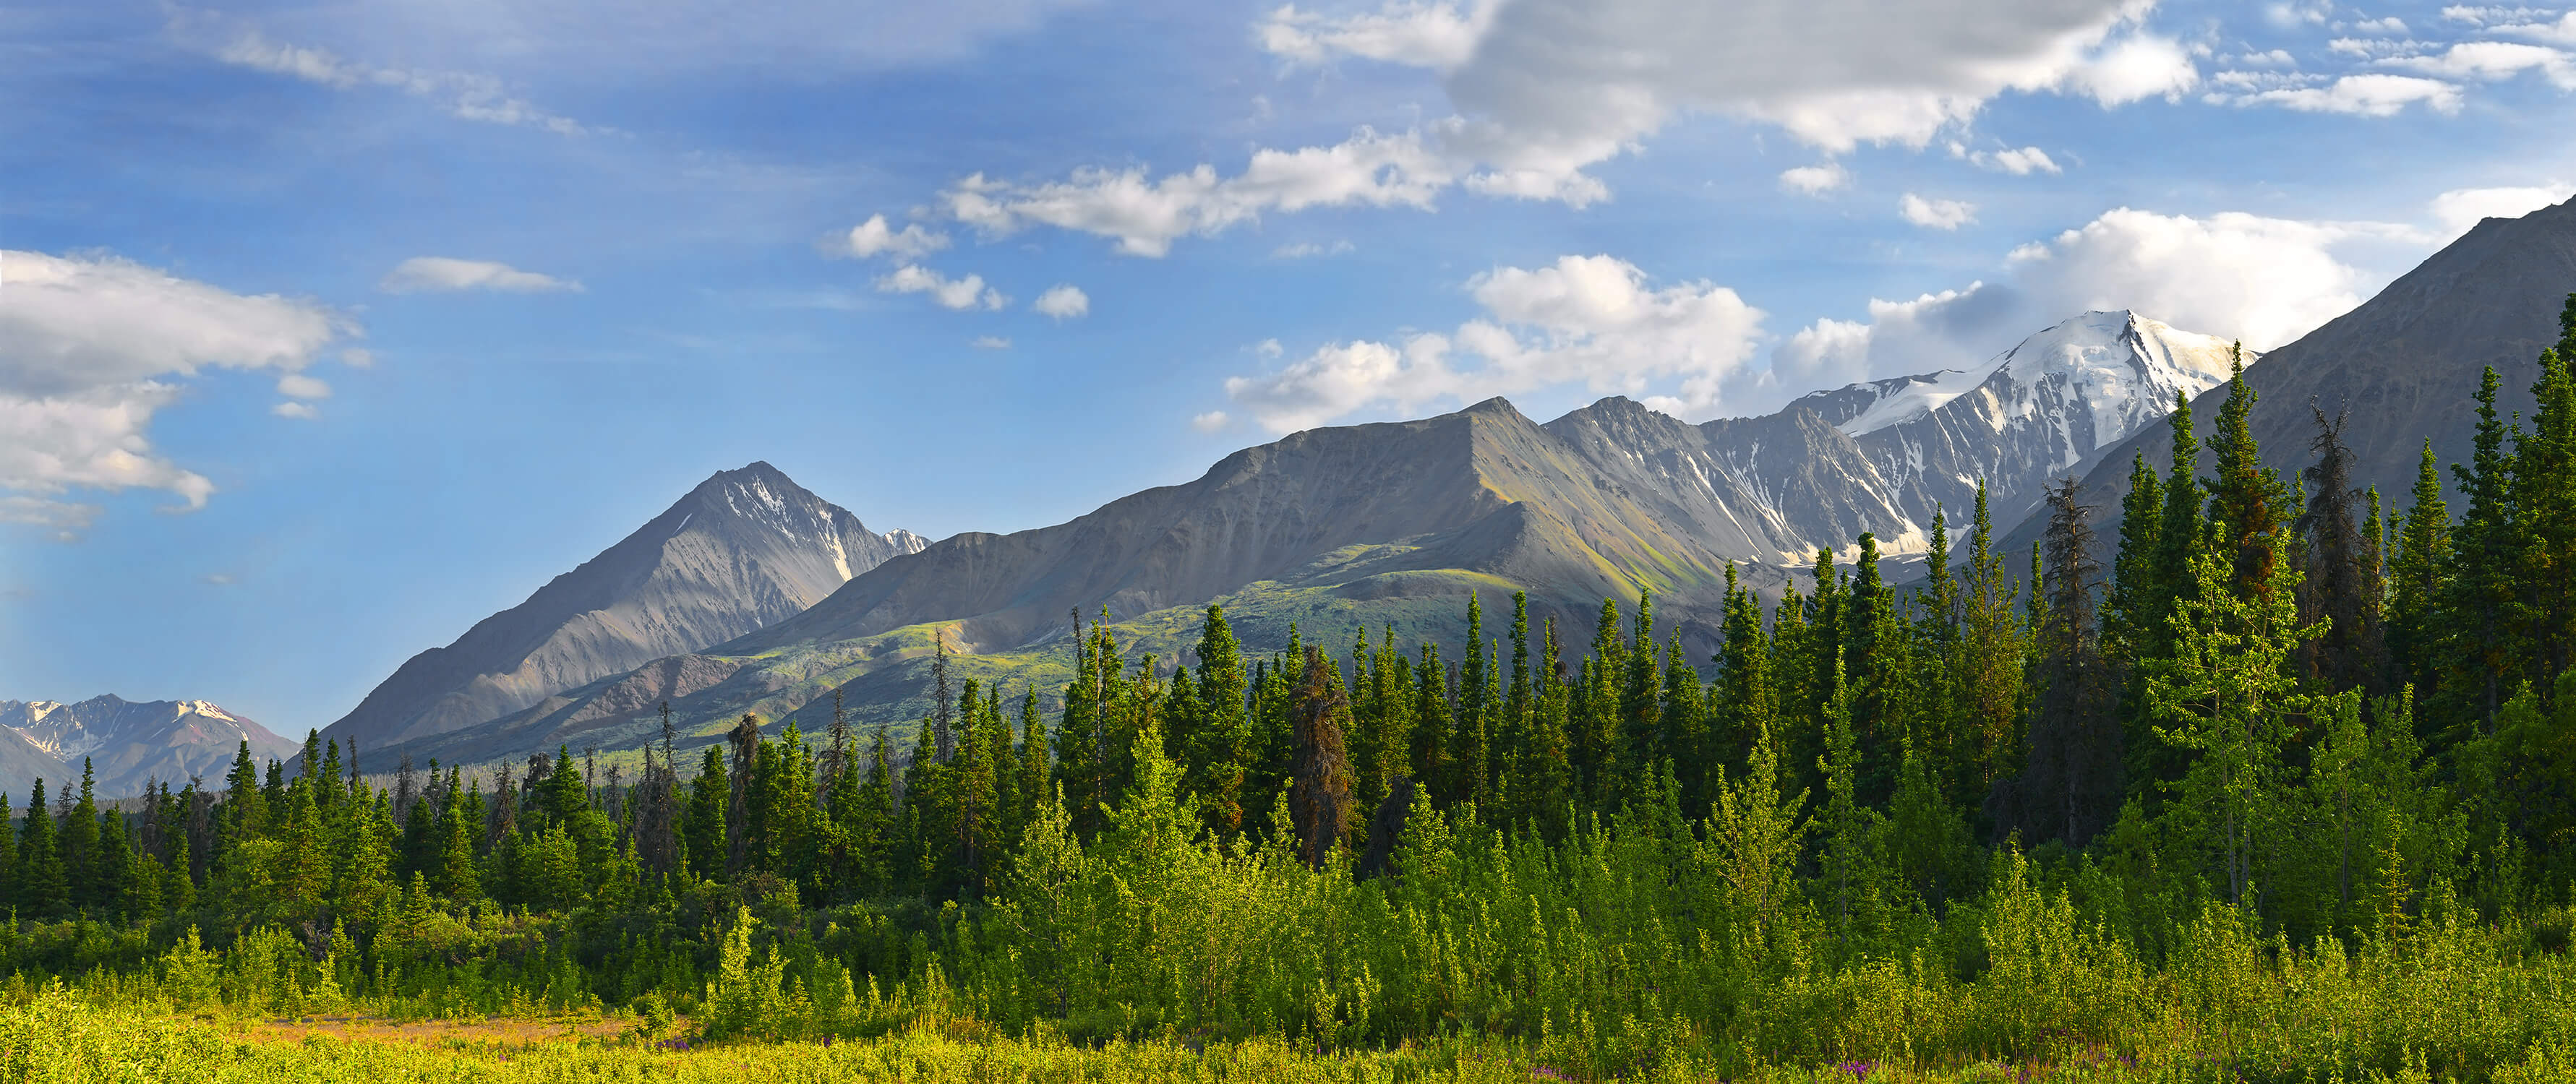 image of mountains on our chiropractic online continuing education page